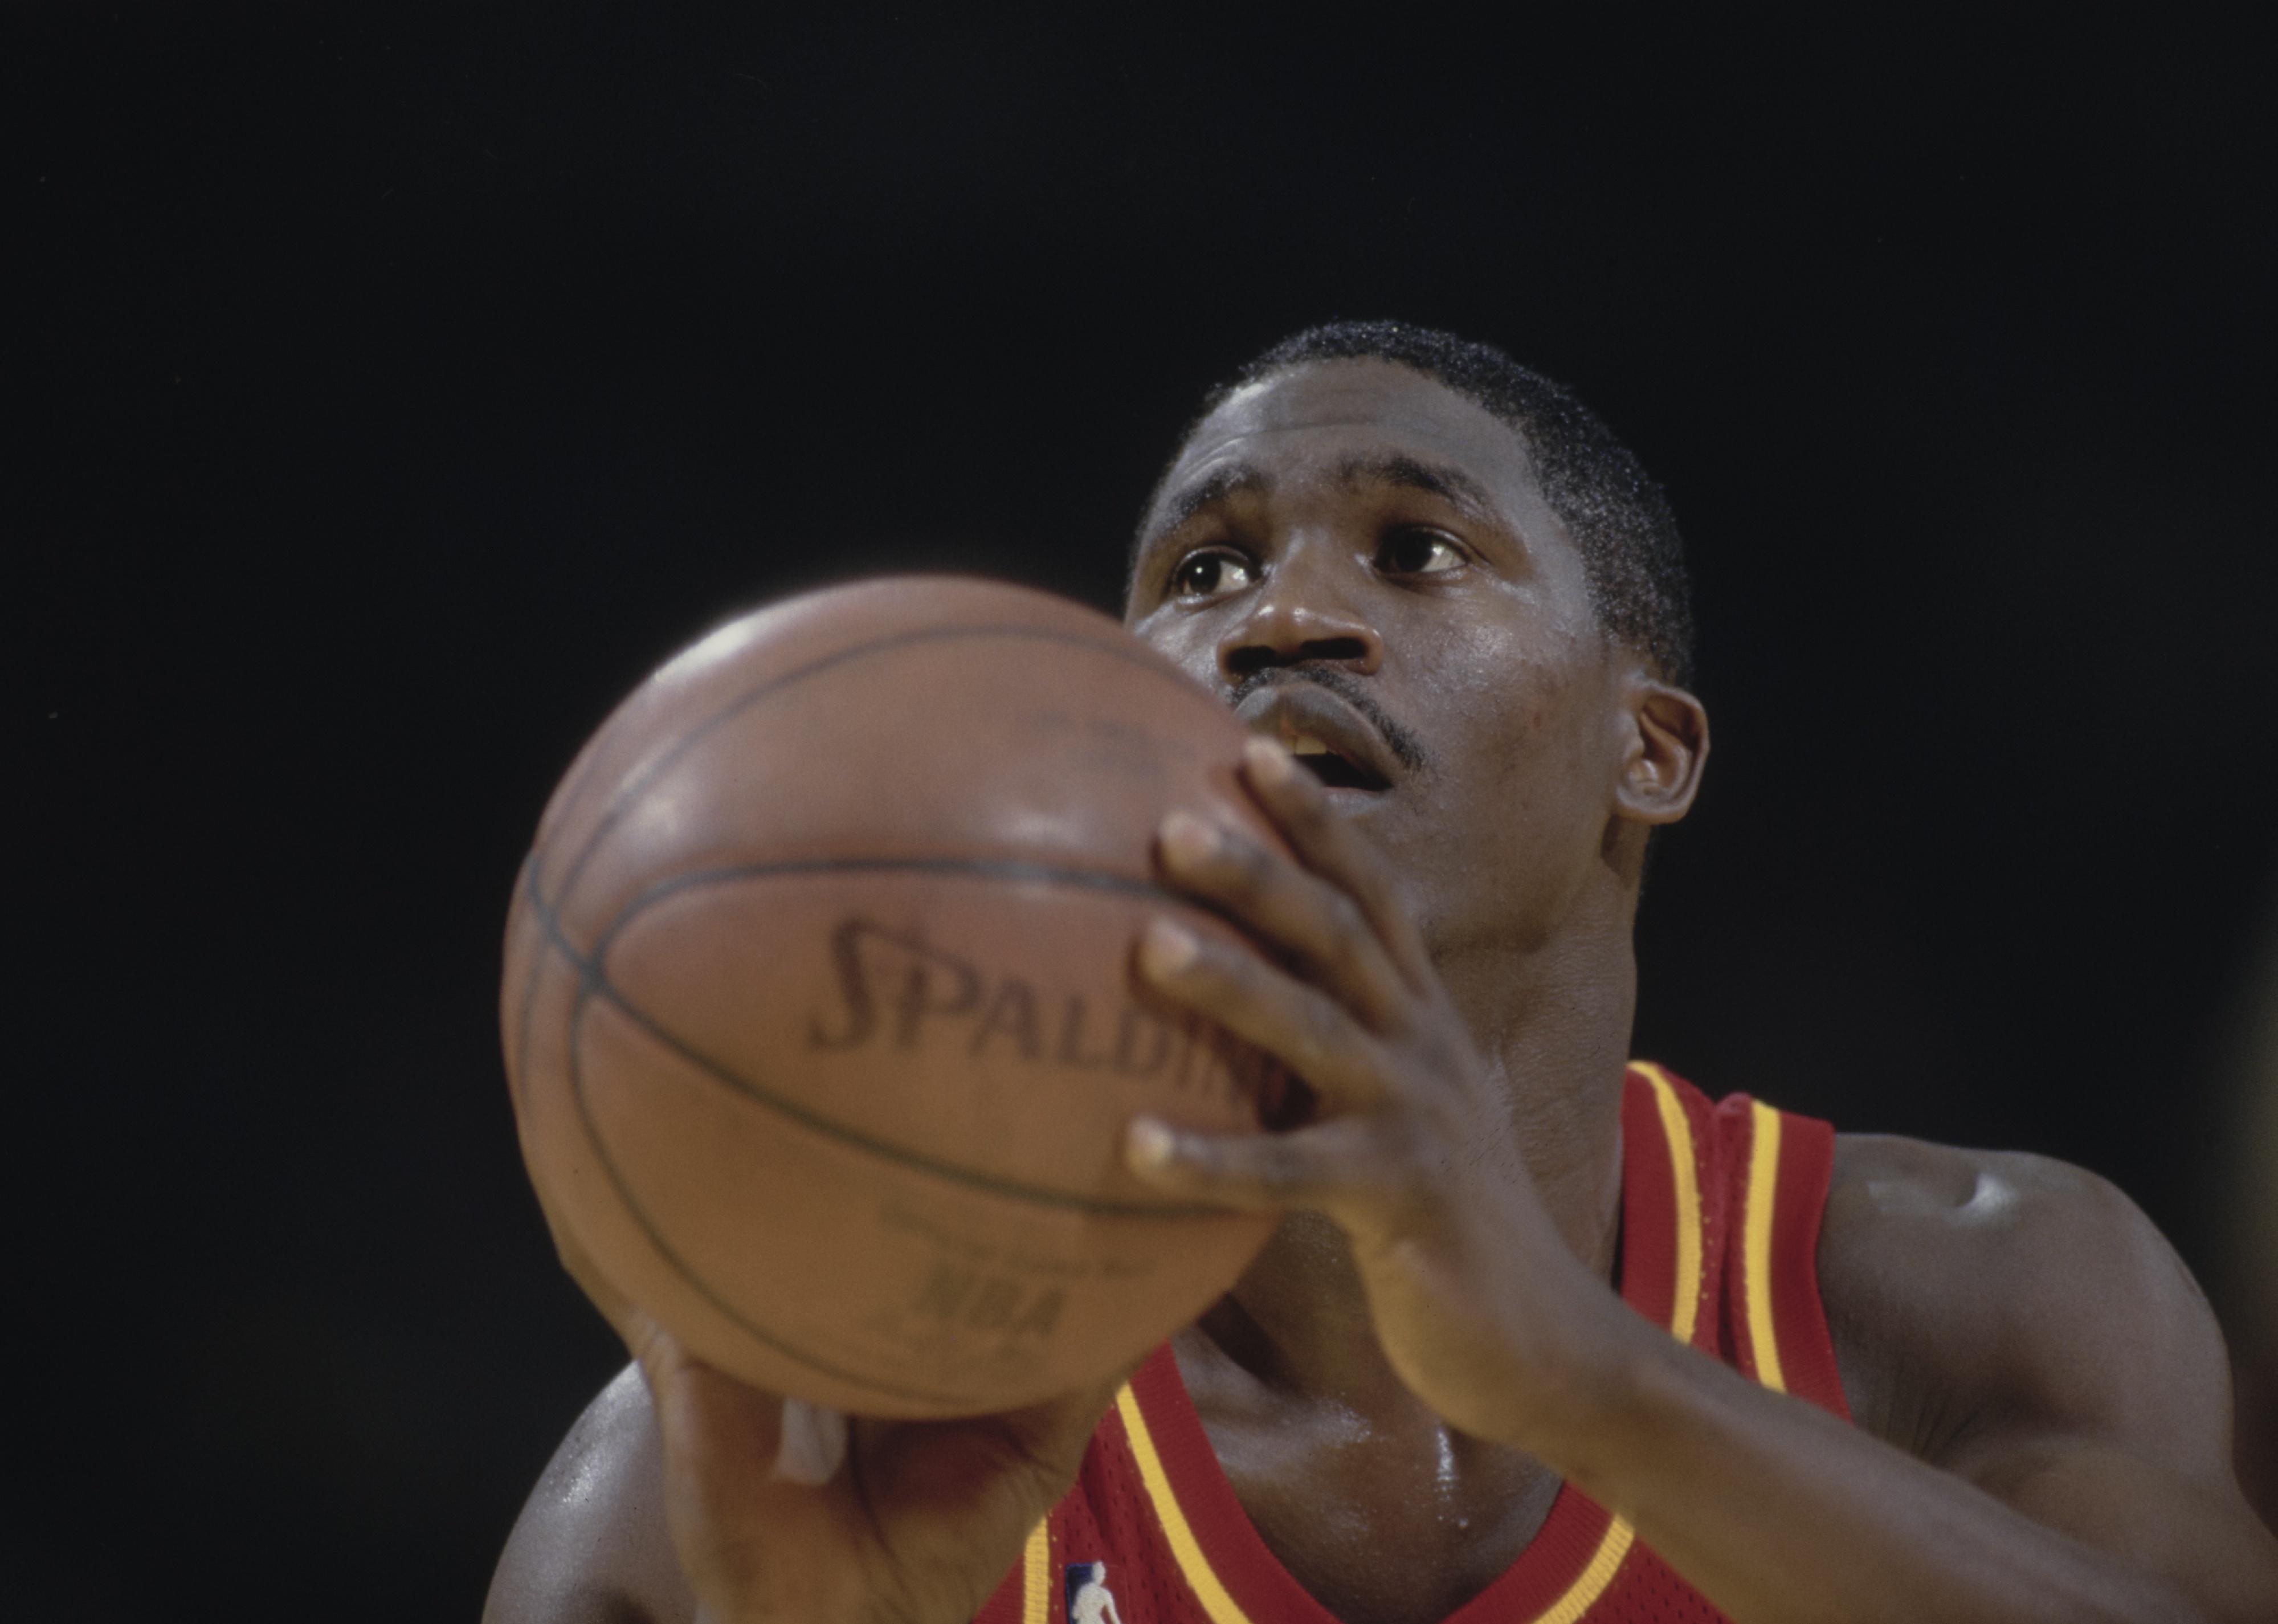 Dominique Wilkins prepares to shoot a free throw during a game.